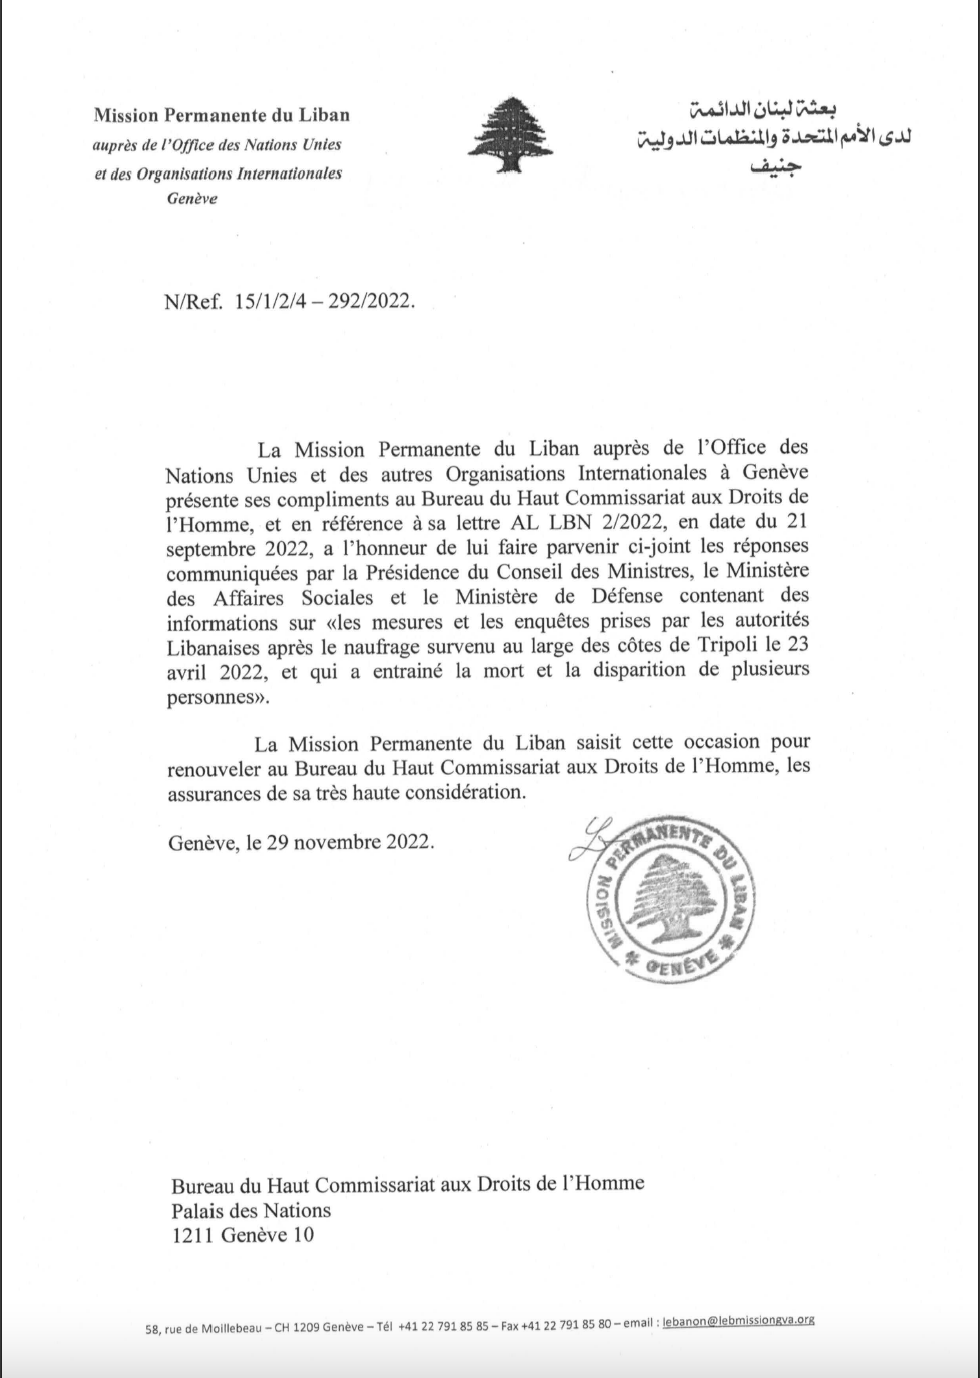 First page of the correspondance between the Ministries of Social Affairs, and Defense to the UN special rapporteurs